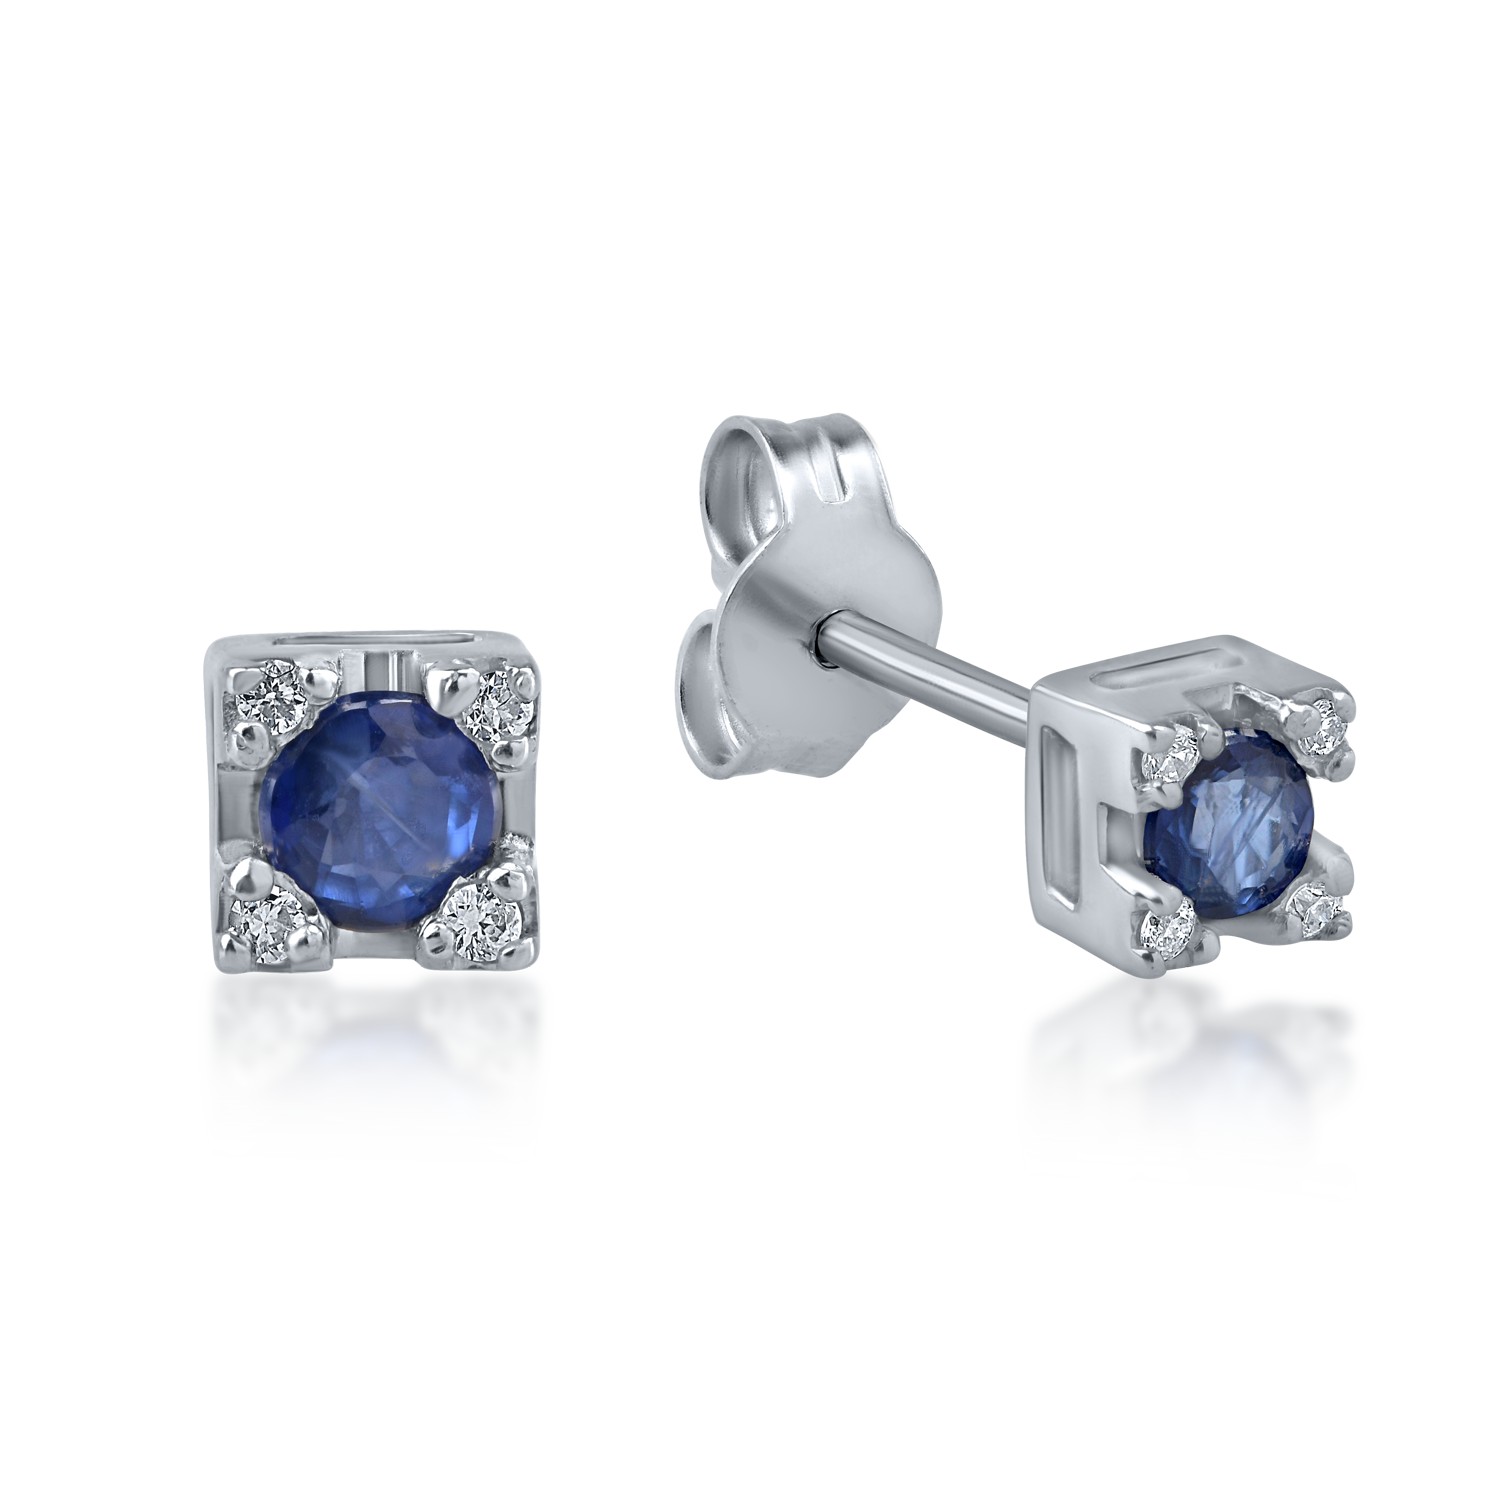 White gold minimalist earrings with 0.29ct sapphires and 0.03ct diamonds